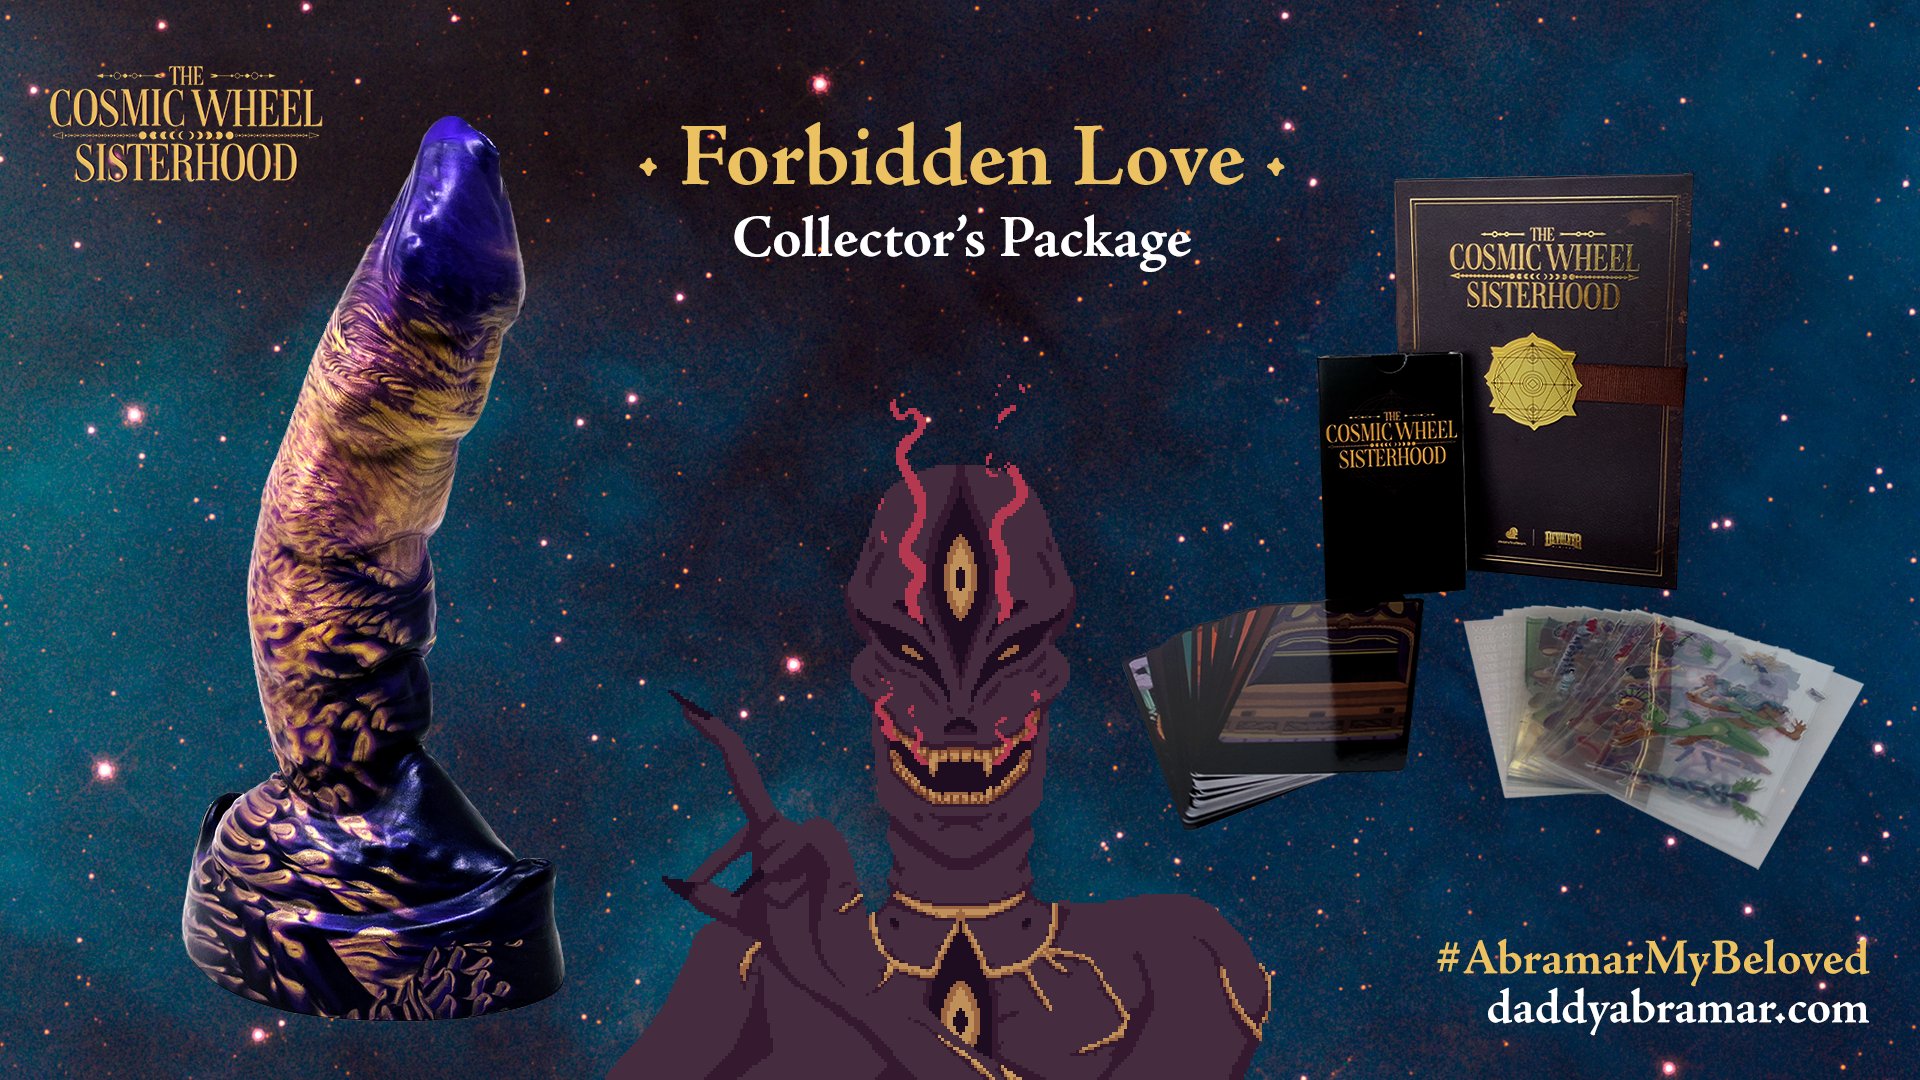 The Cosmic Wheel Sisterhood Collector’s “Package” Includes…Ábramar’s might (It’s a Dildo)